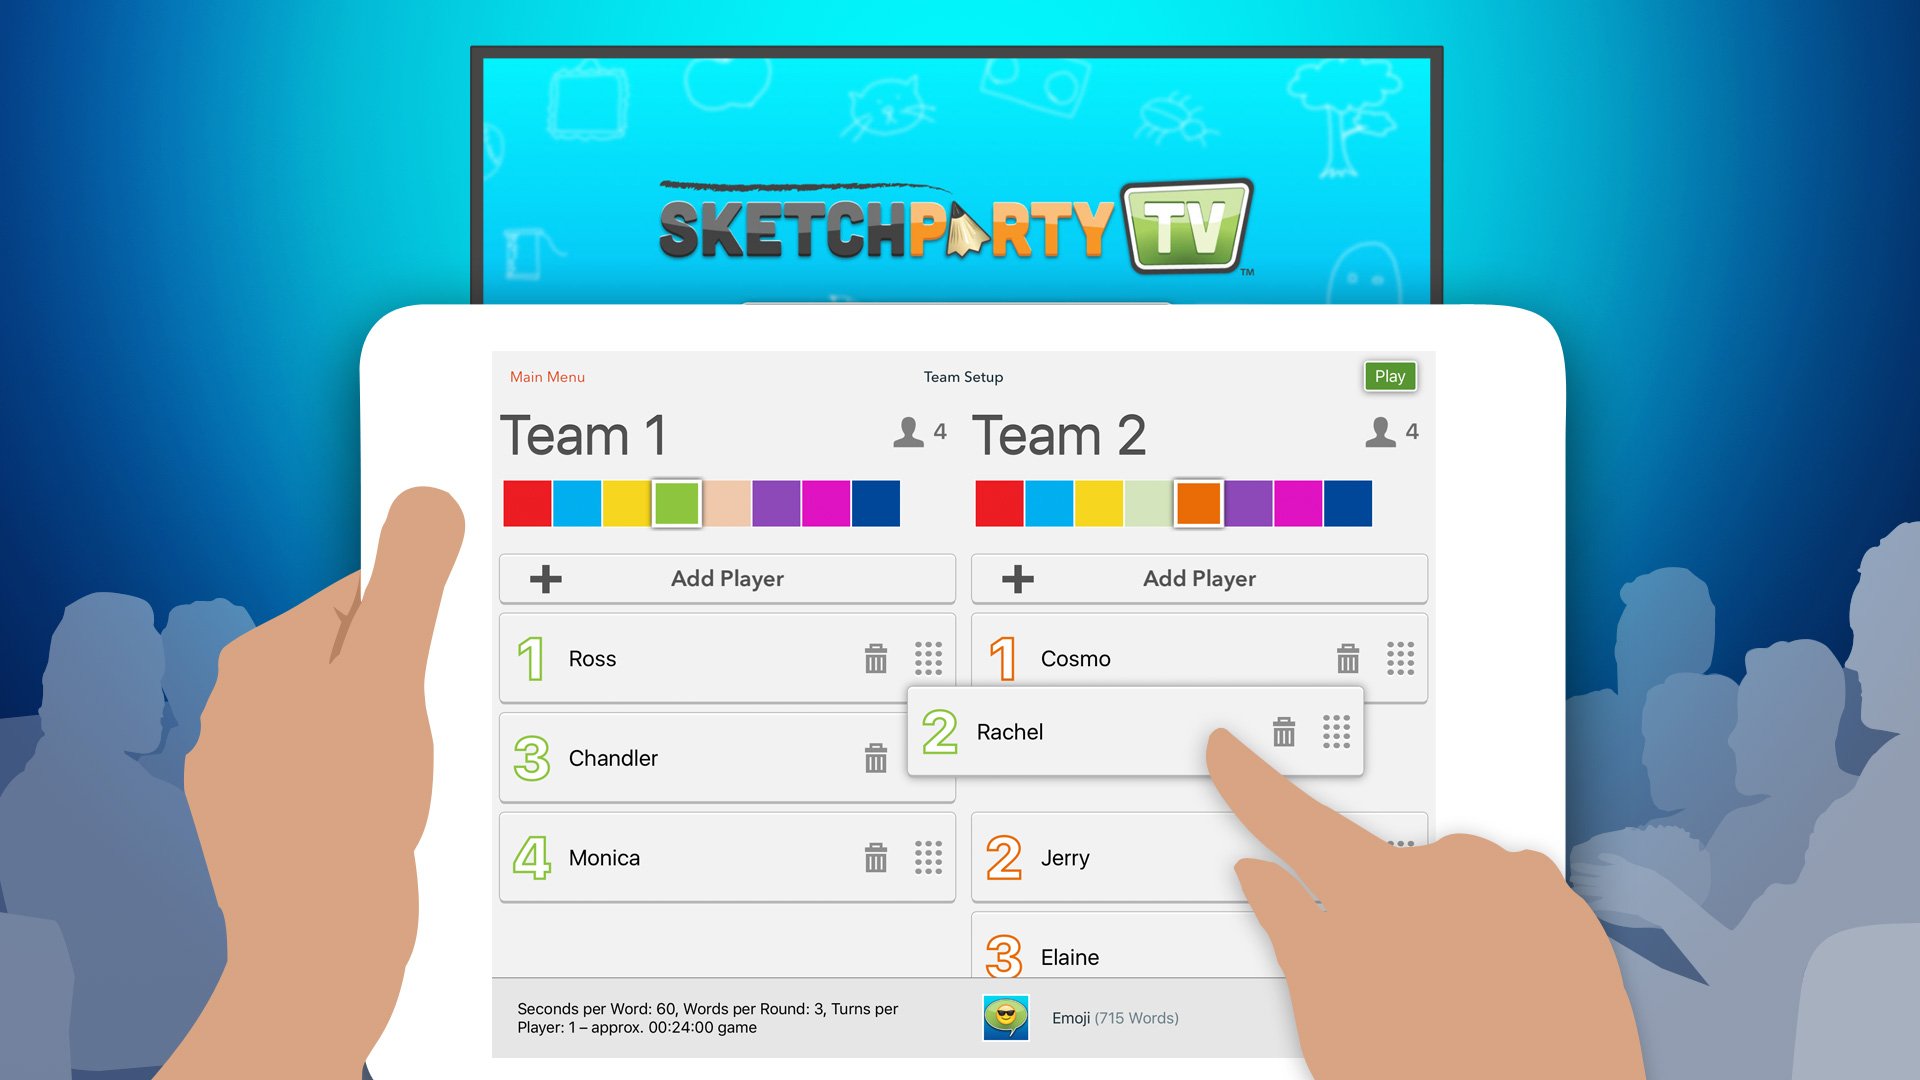 SketchParty TV 4.0 released with new design, Apple Pencil support, and more